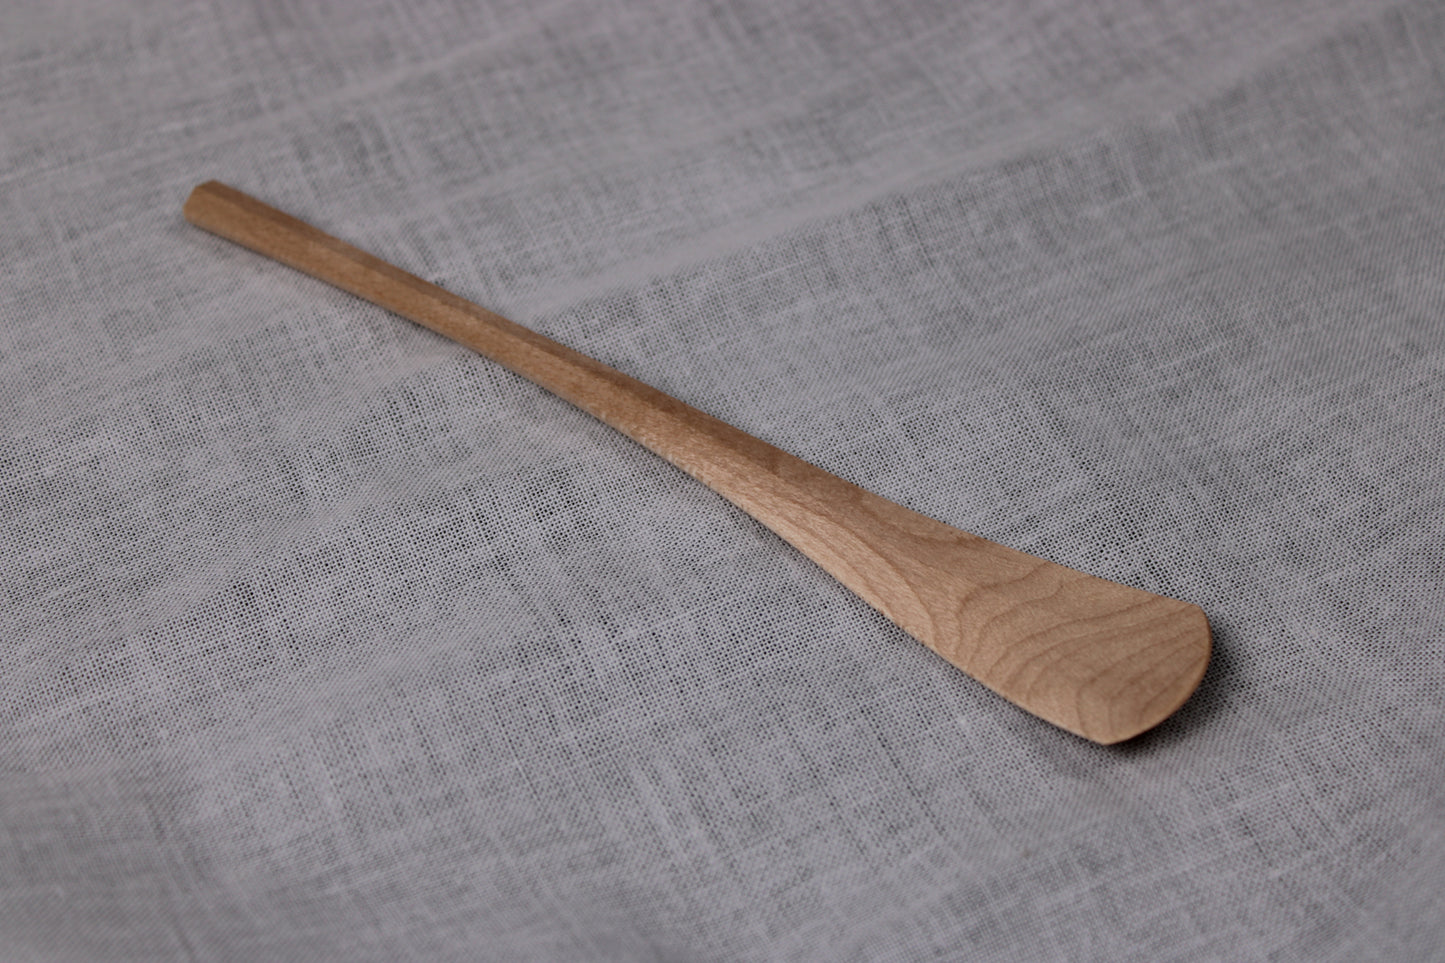 okubo house handmade artisan maple wood spoon made without sanding or filing layed flat with white background